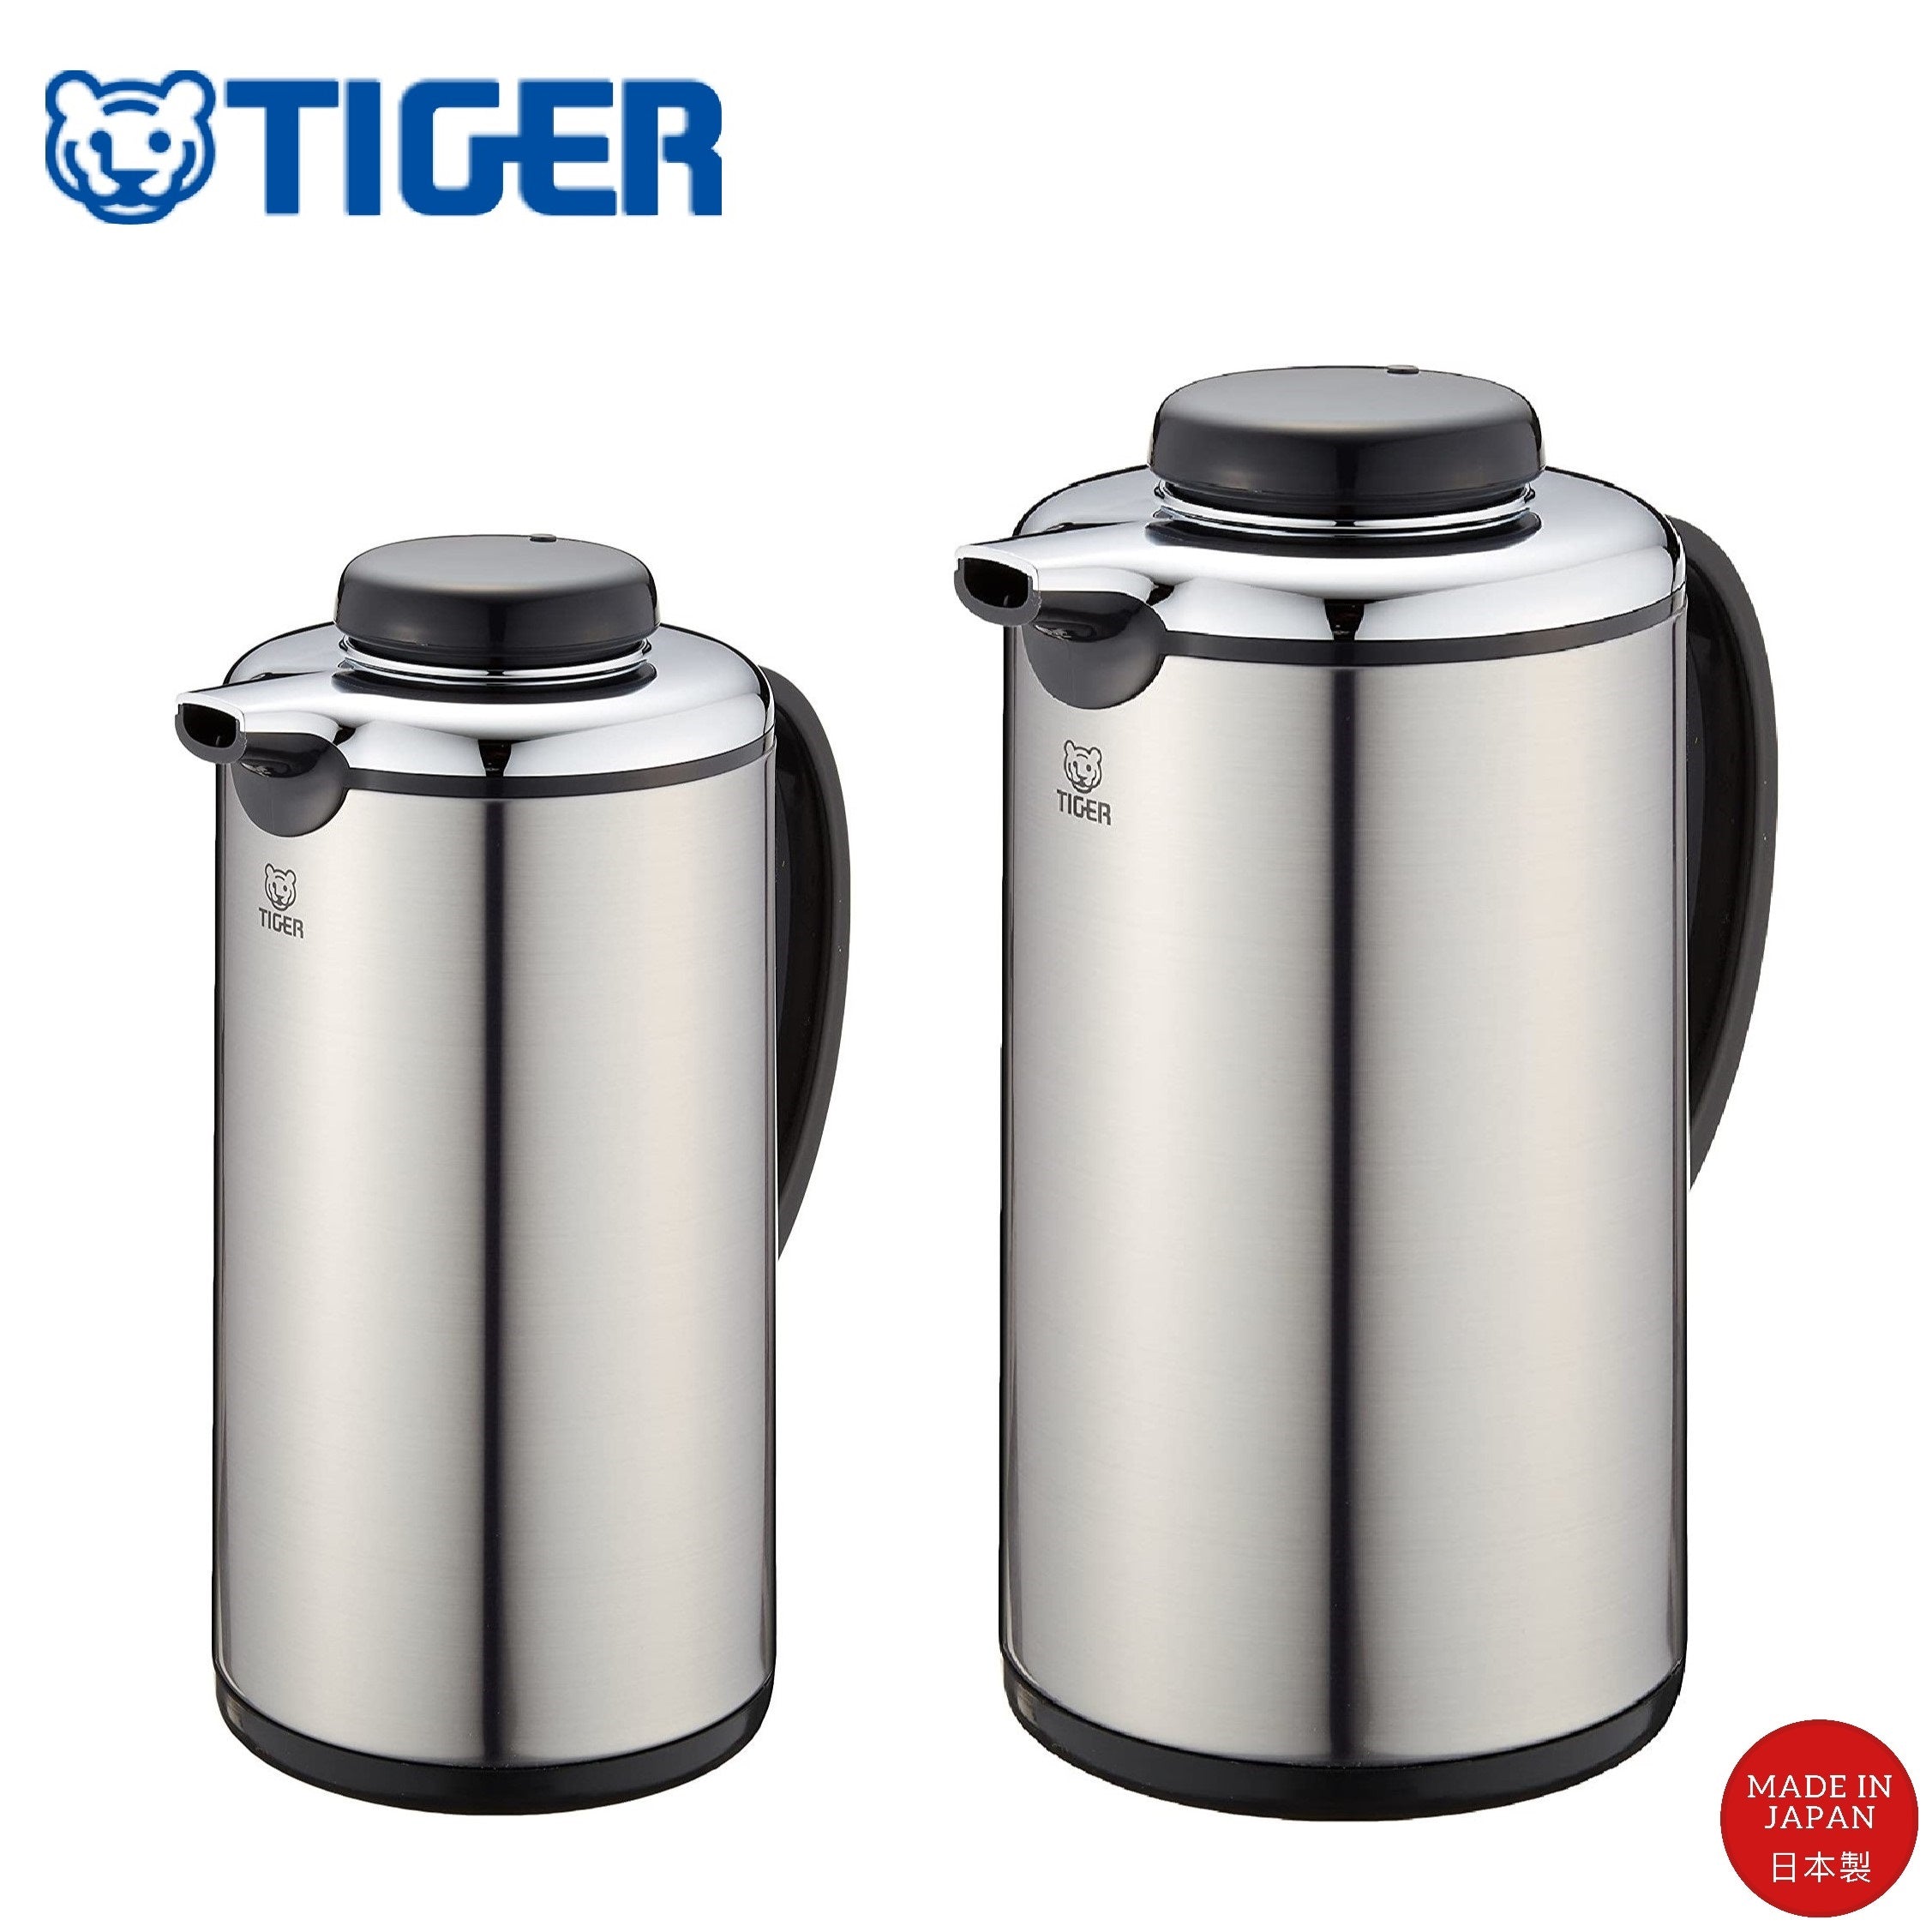 Tiger Vacuum Insulated Stainless Steel Bottle 0.99L/1.84L (Made in Jap